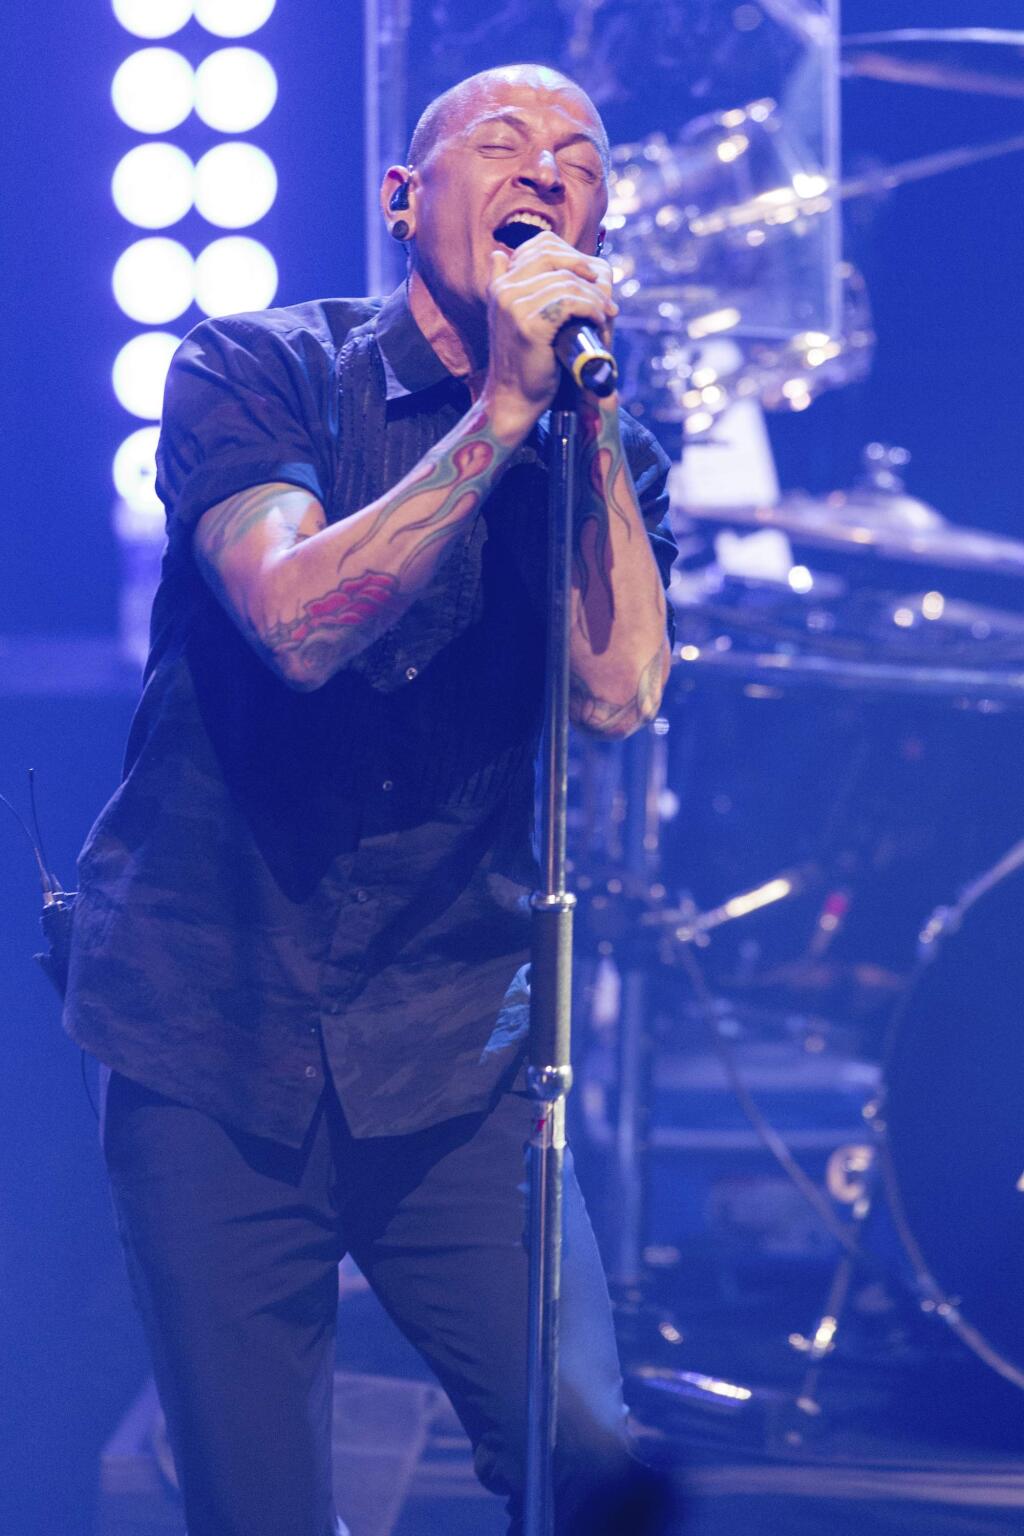 FILE - In this June 18, 2014 file photo, Chester Bennington of Linkin Park performs during the iHeartRadio Live Series in Burbank, Calif. The Los Angeles County coroner says Bennington, who sold millions of albums with a unique mix of rock, hip-hop and rap, has died in his home near Los Angeles. He was 41. Coroner spokesman Brian Elias says they are investigating Bennington's death as an apparent suicide but no additional details are available. (Photo by Paul A. Hebert/Invision/AP, File)